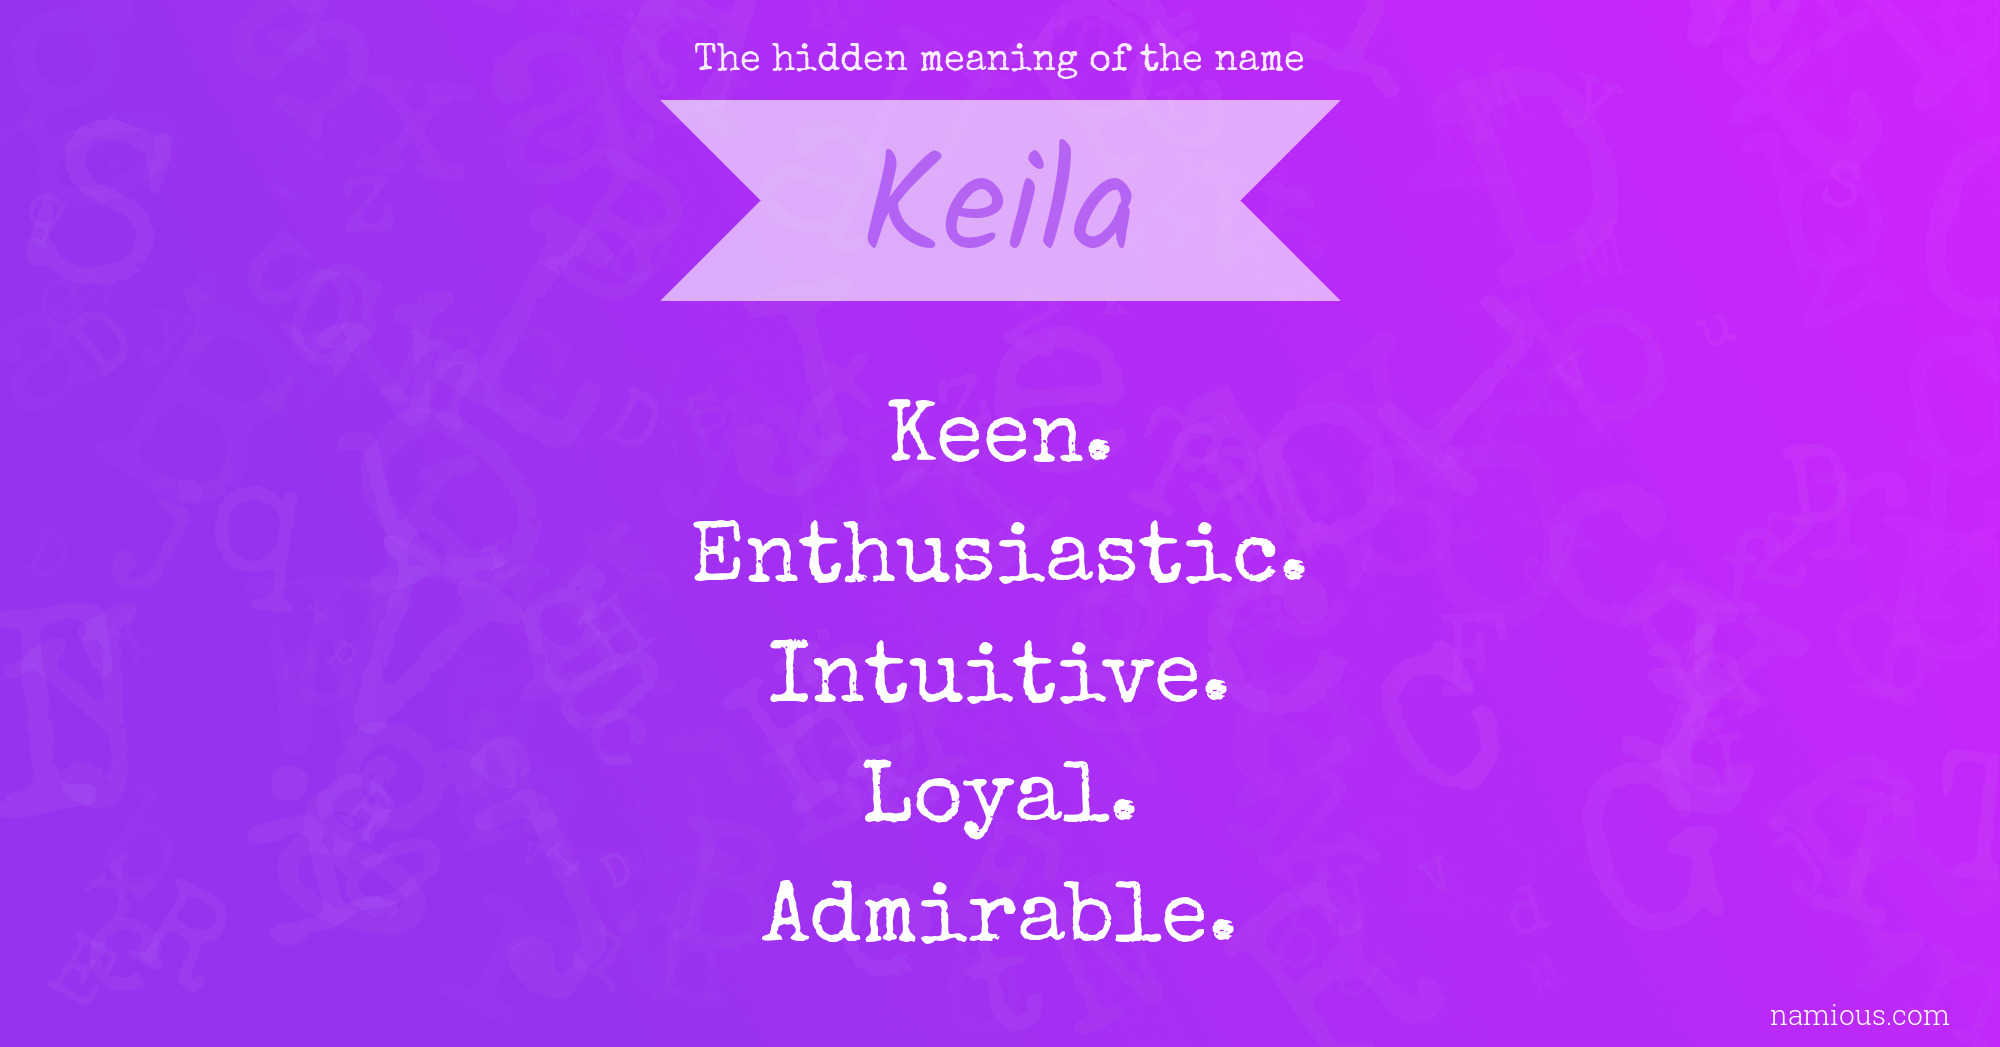 The hidden meaning of the name Keila